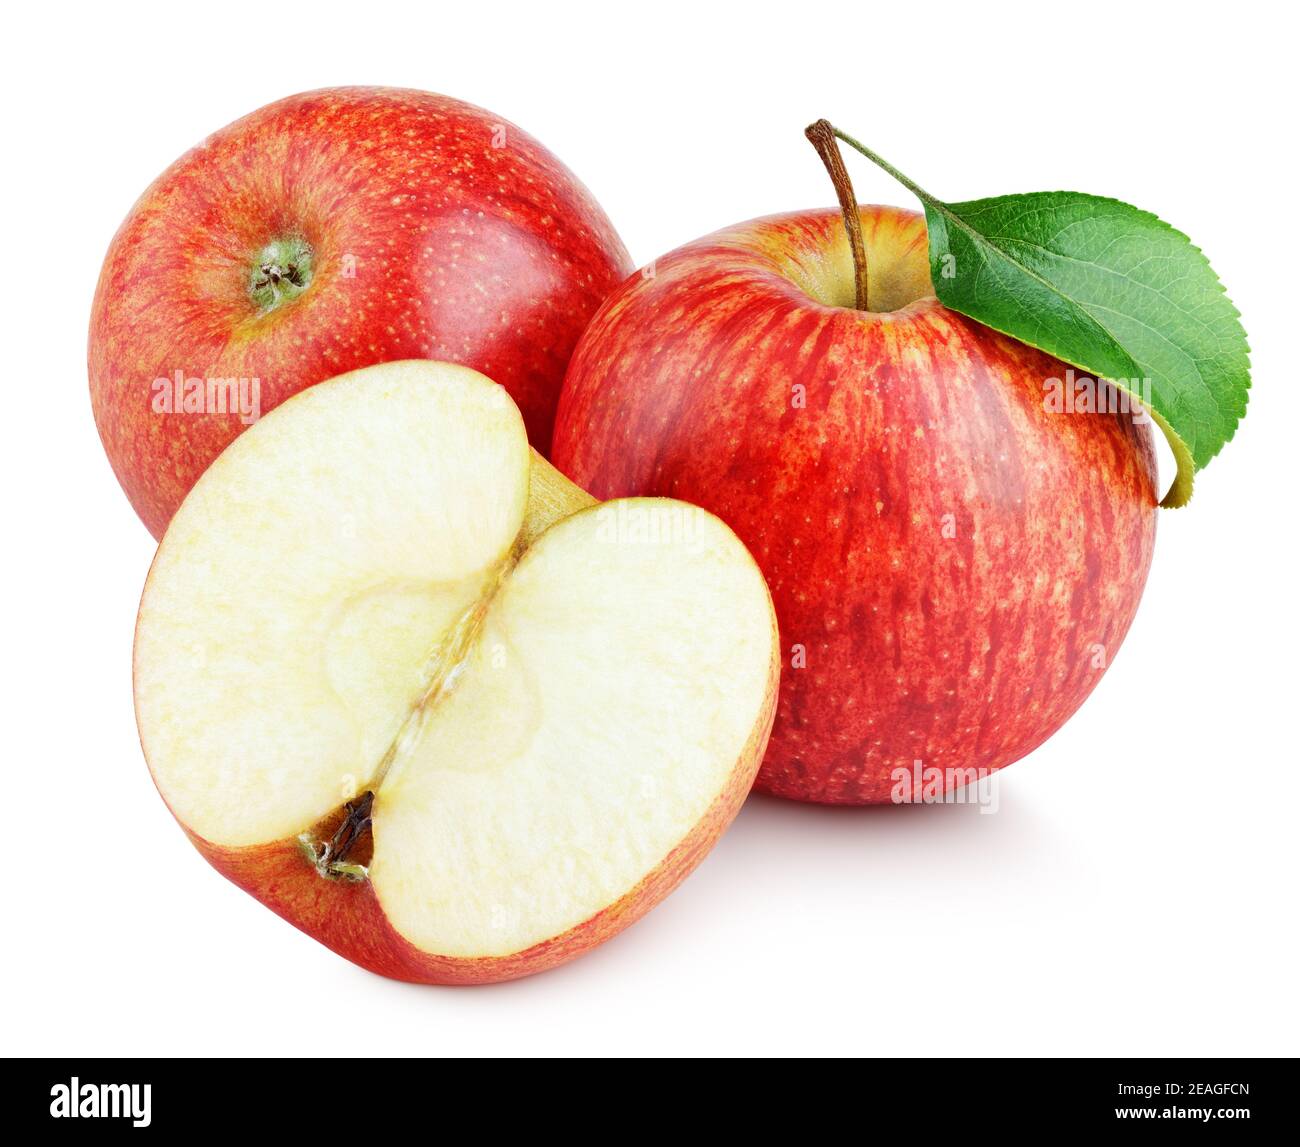 Ripe red apple fruit with apple half without seeds and apple leaf isolated on white background. Red apples and leaf with clipping path Stock Photo